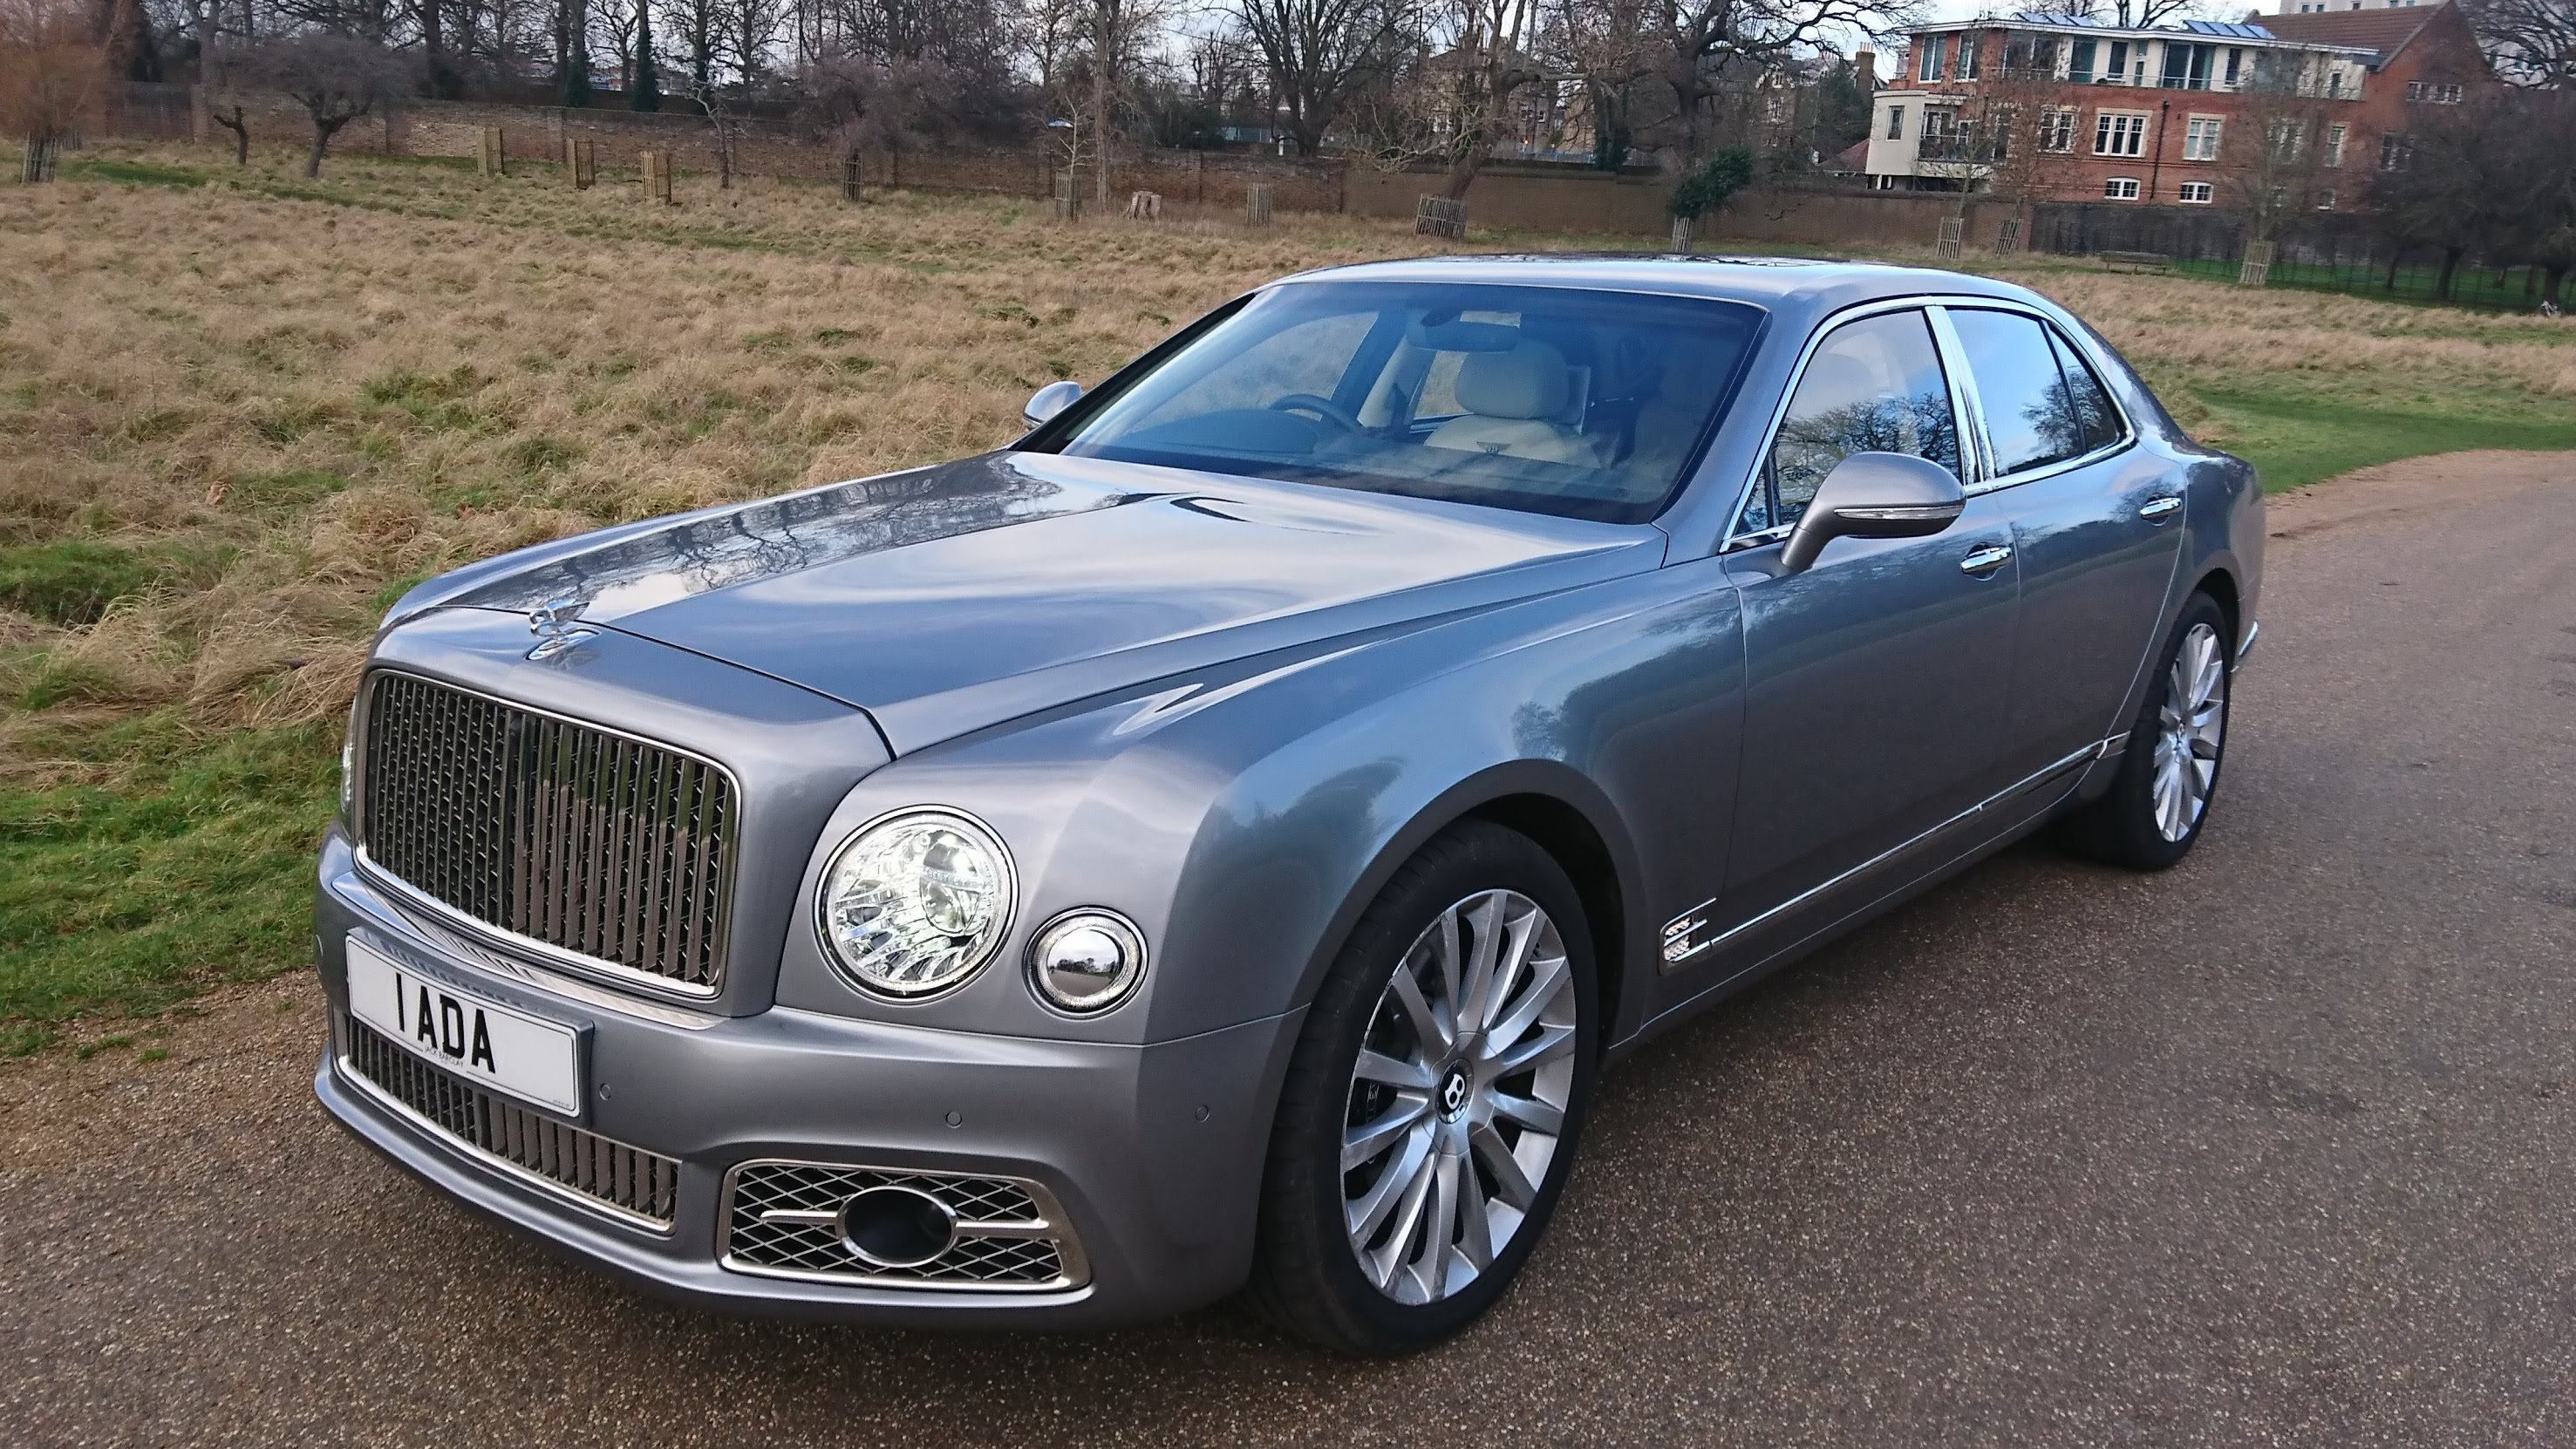 Modern Silver Benltey Mulsanne at a local Guildford park in a winter background.